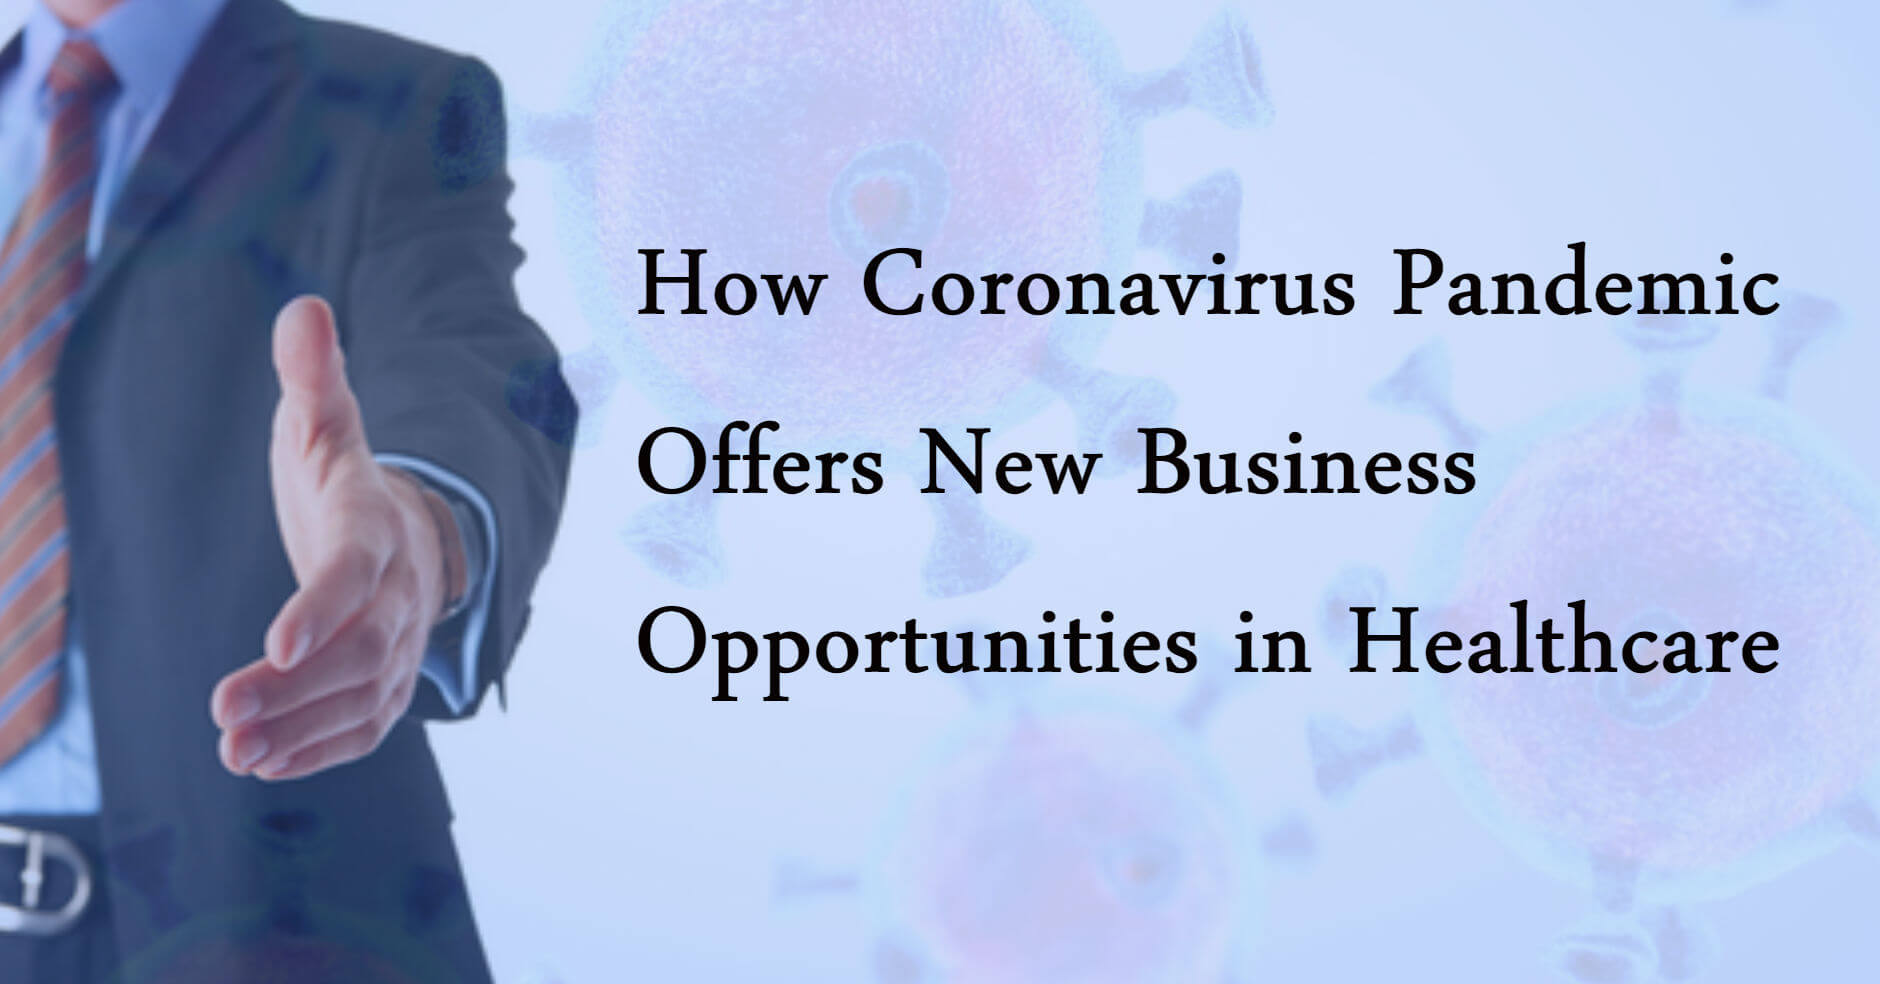 How Coronavirus Pandemic Offers New Business Opportunities in Healthcare